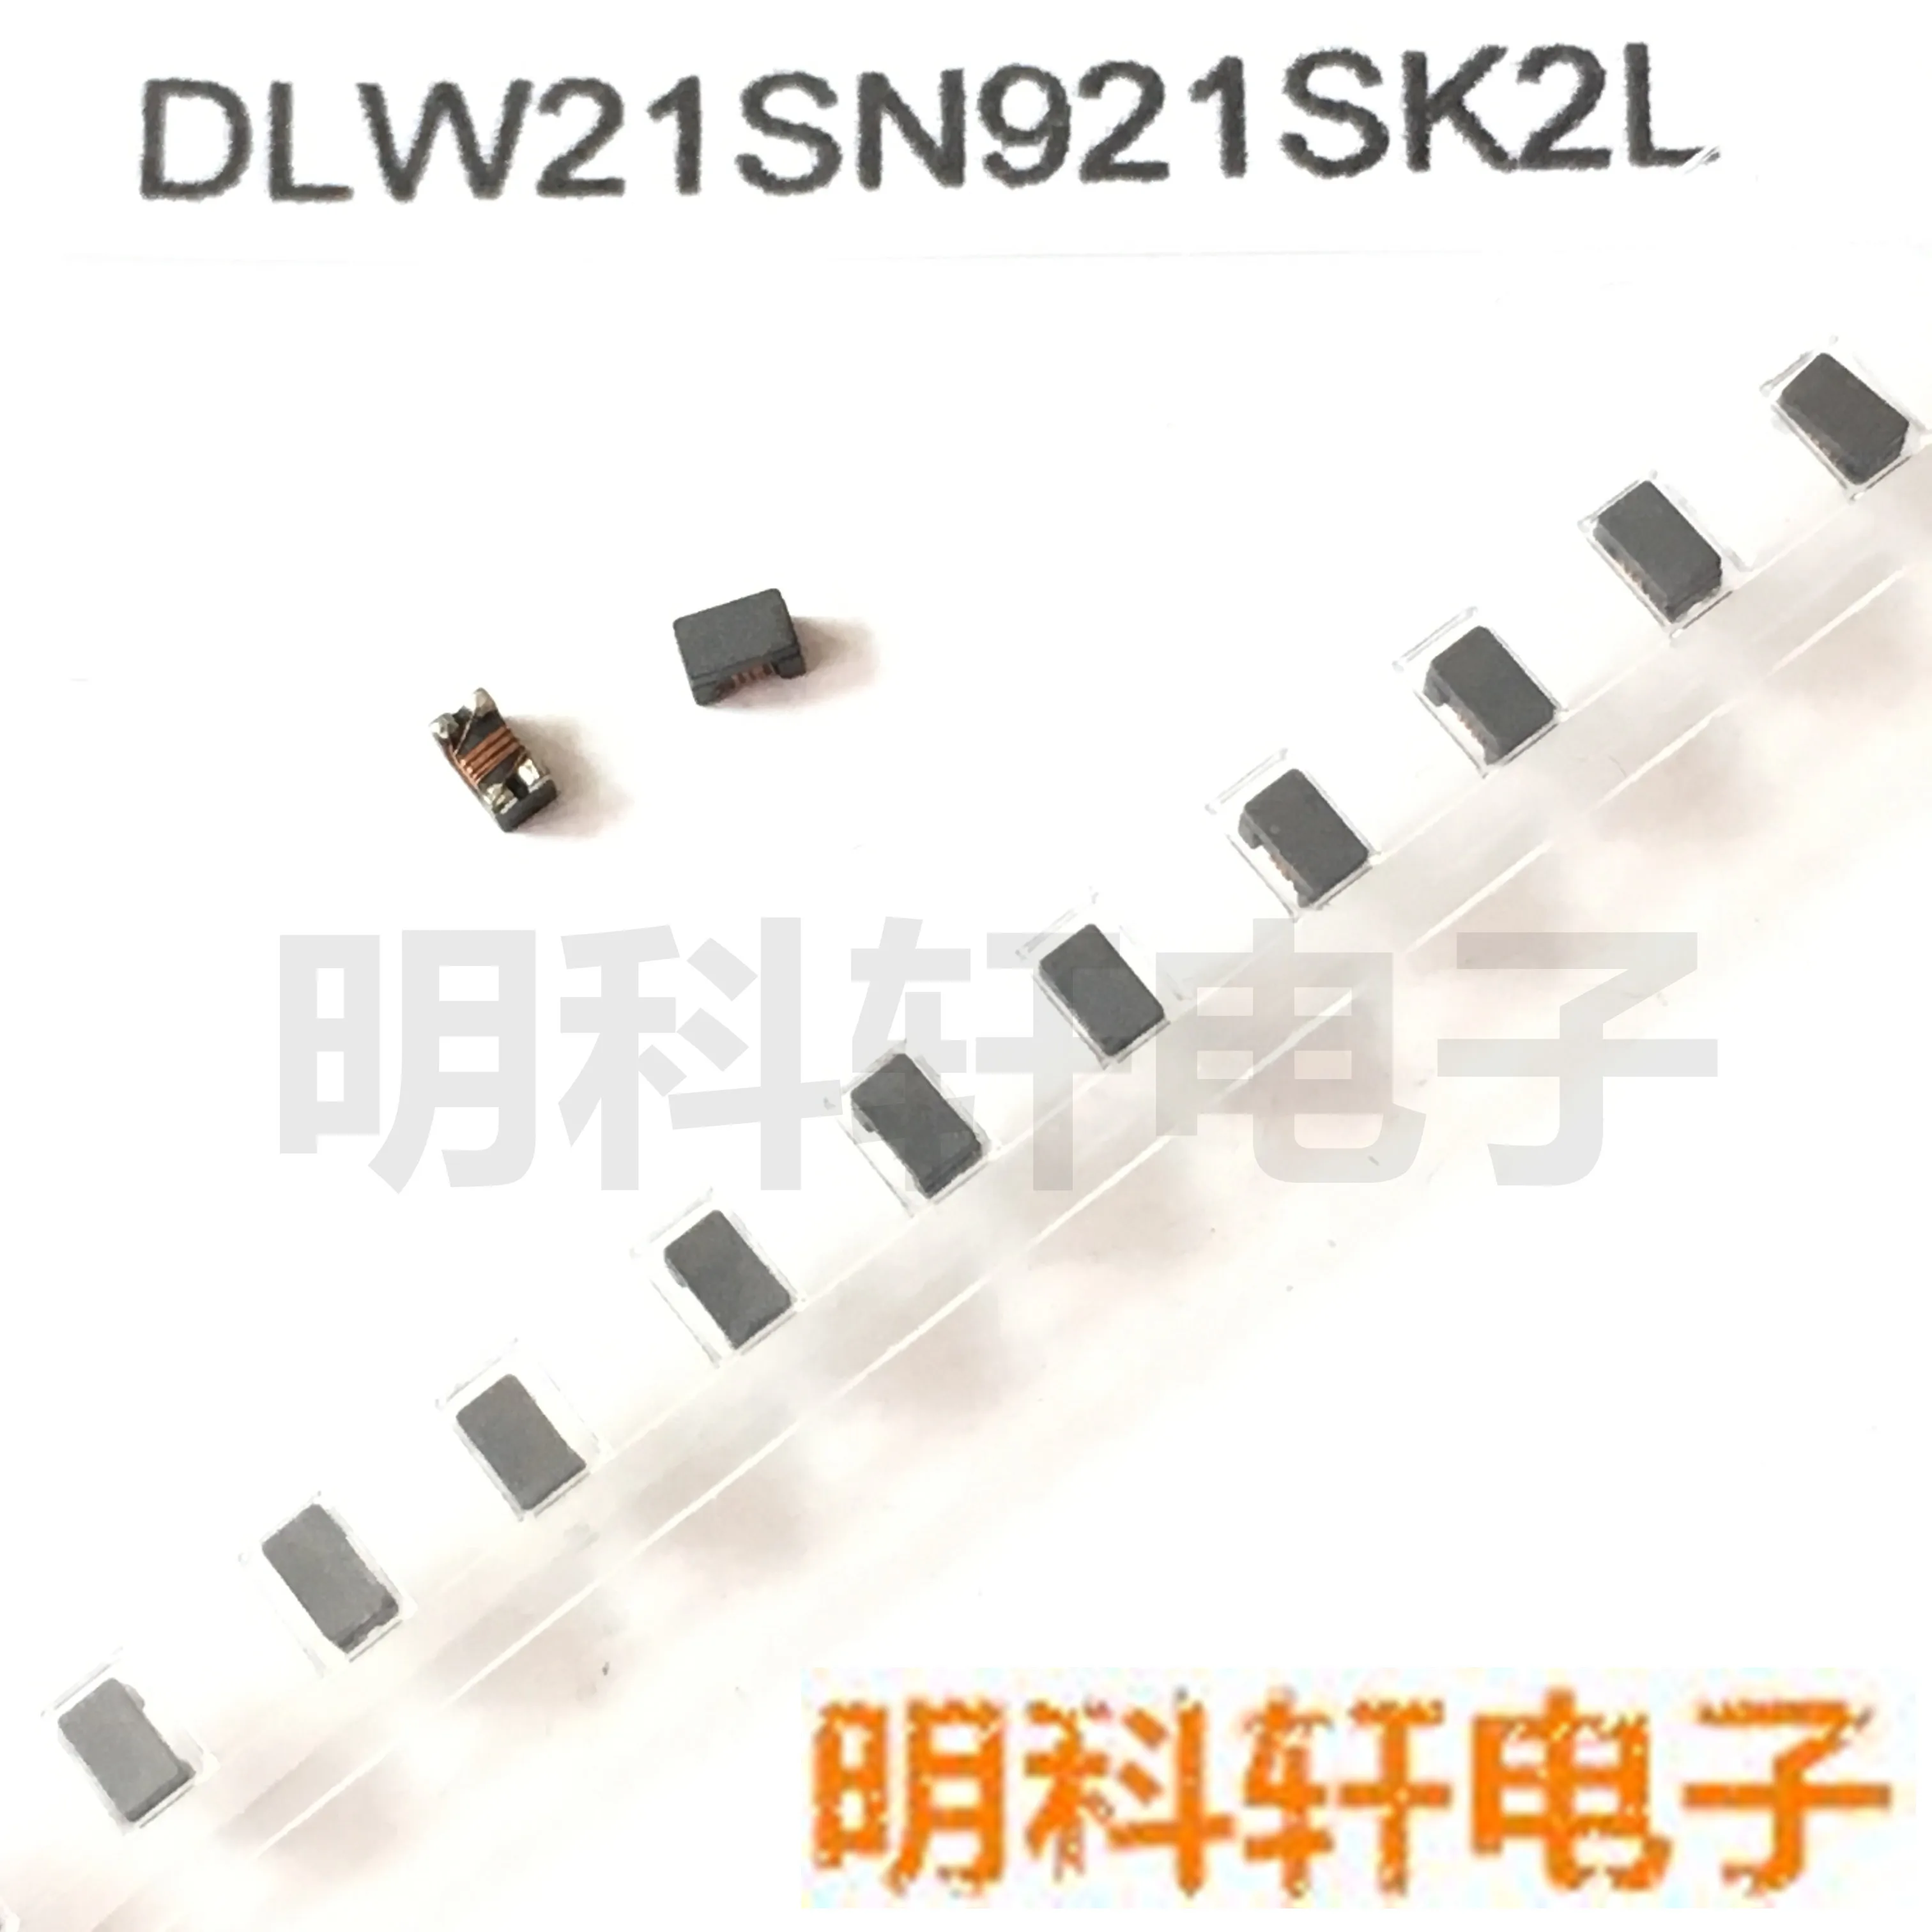 

Original new 100% DLW21SN921SK2L SMD common mode inductance 0805 920R